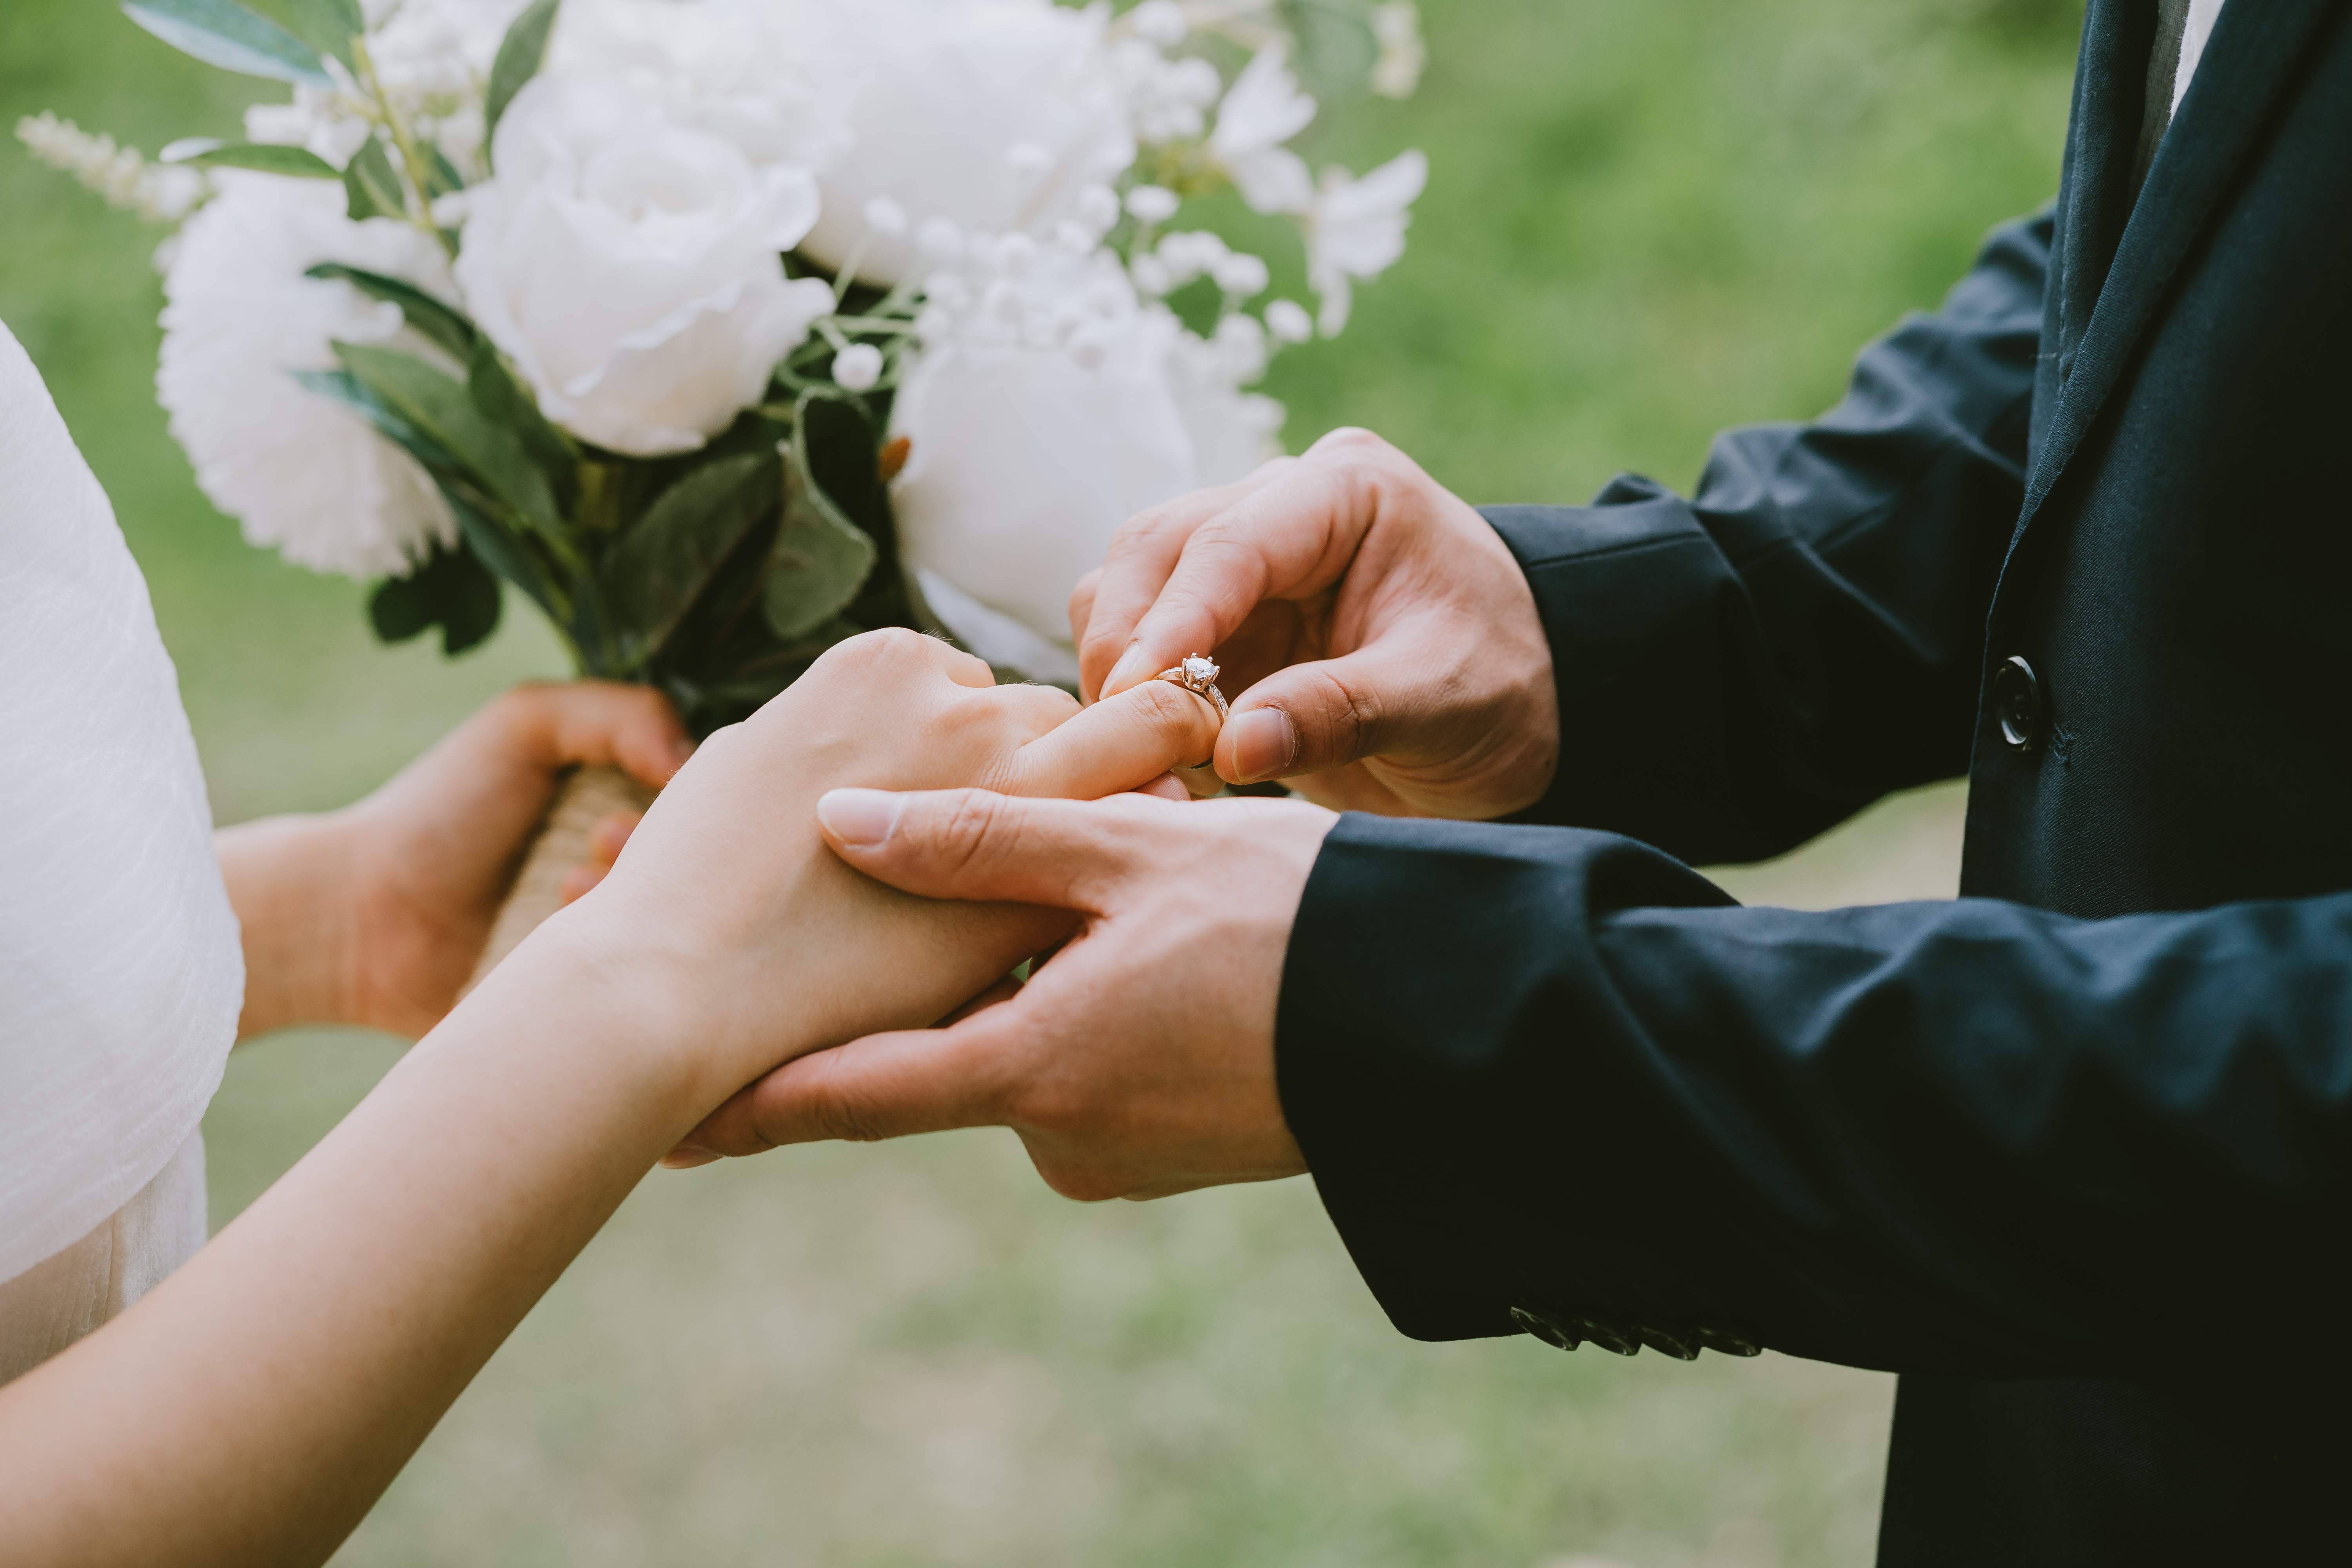 Man putting a ring on his fiancée’s finger | Source: Shutterstock